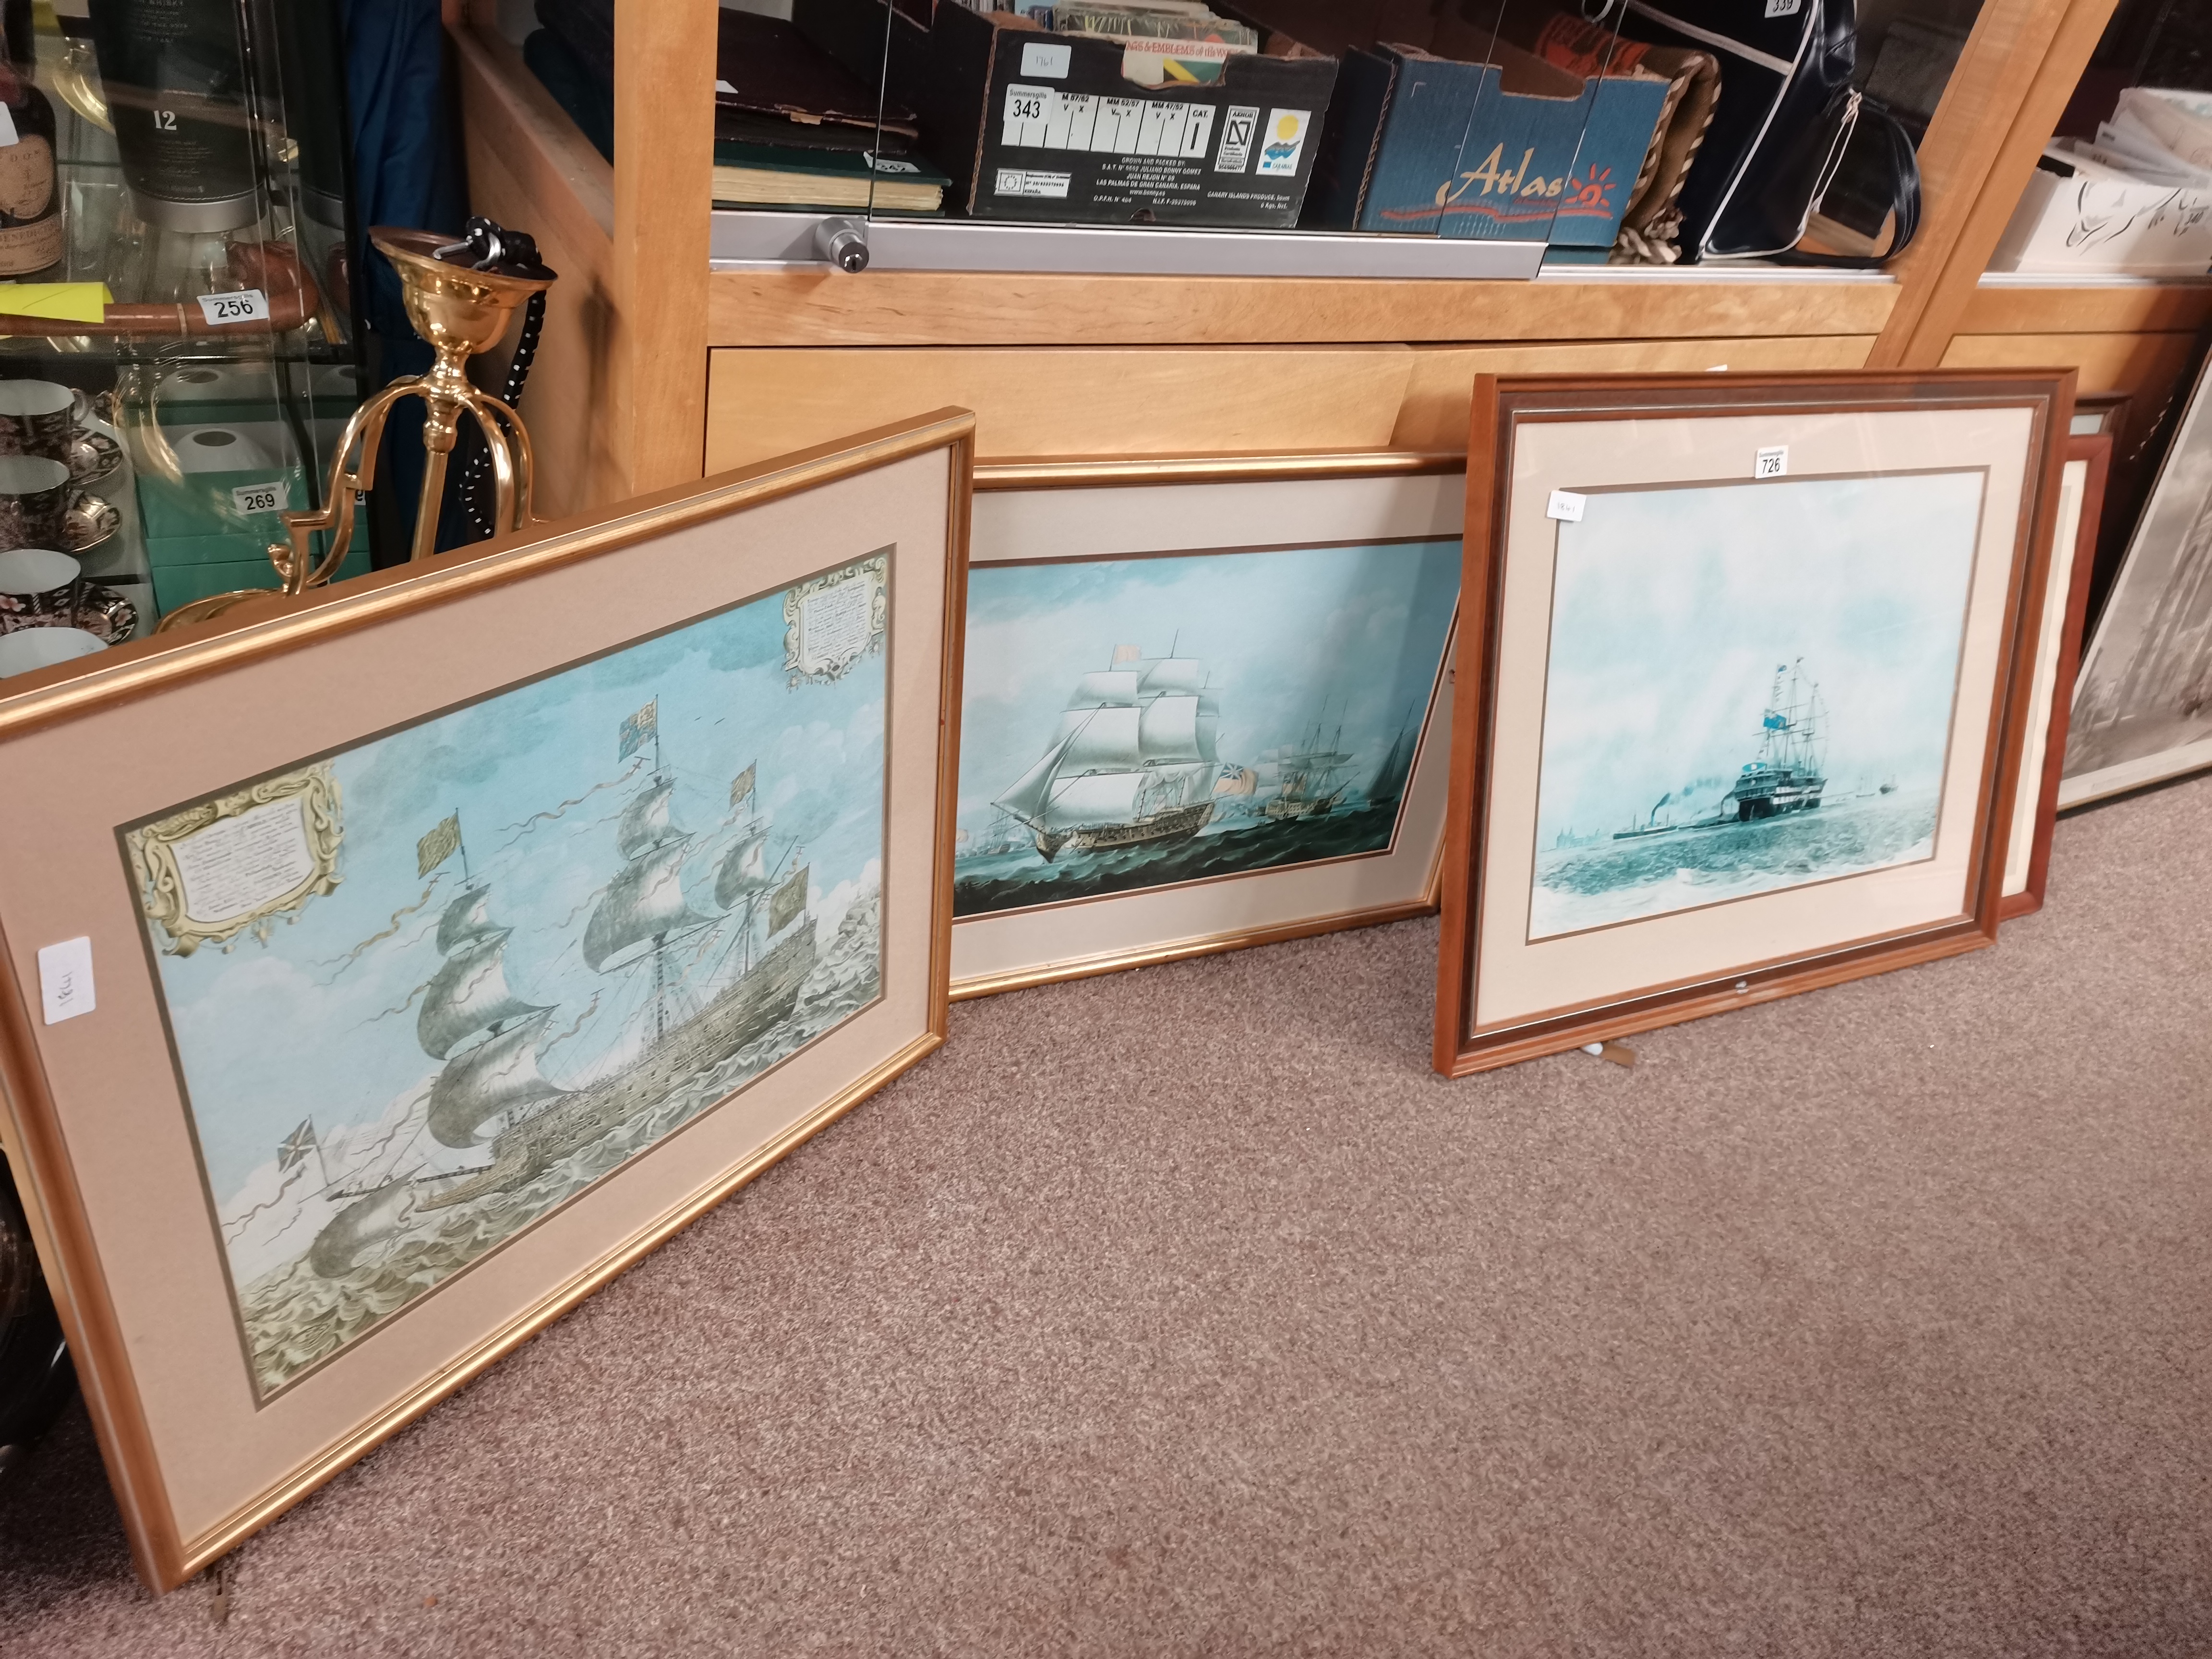 X3 framed pictures of ships - one of them of H.M.S Conway 1815 - 1954